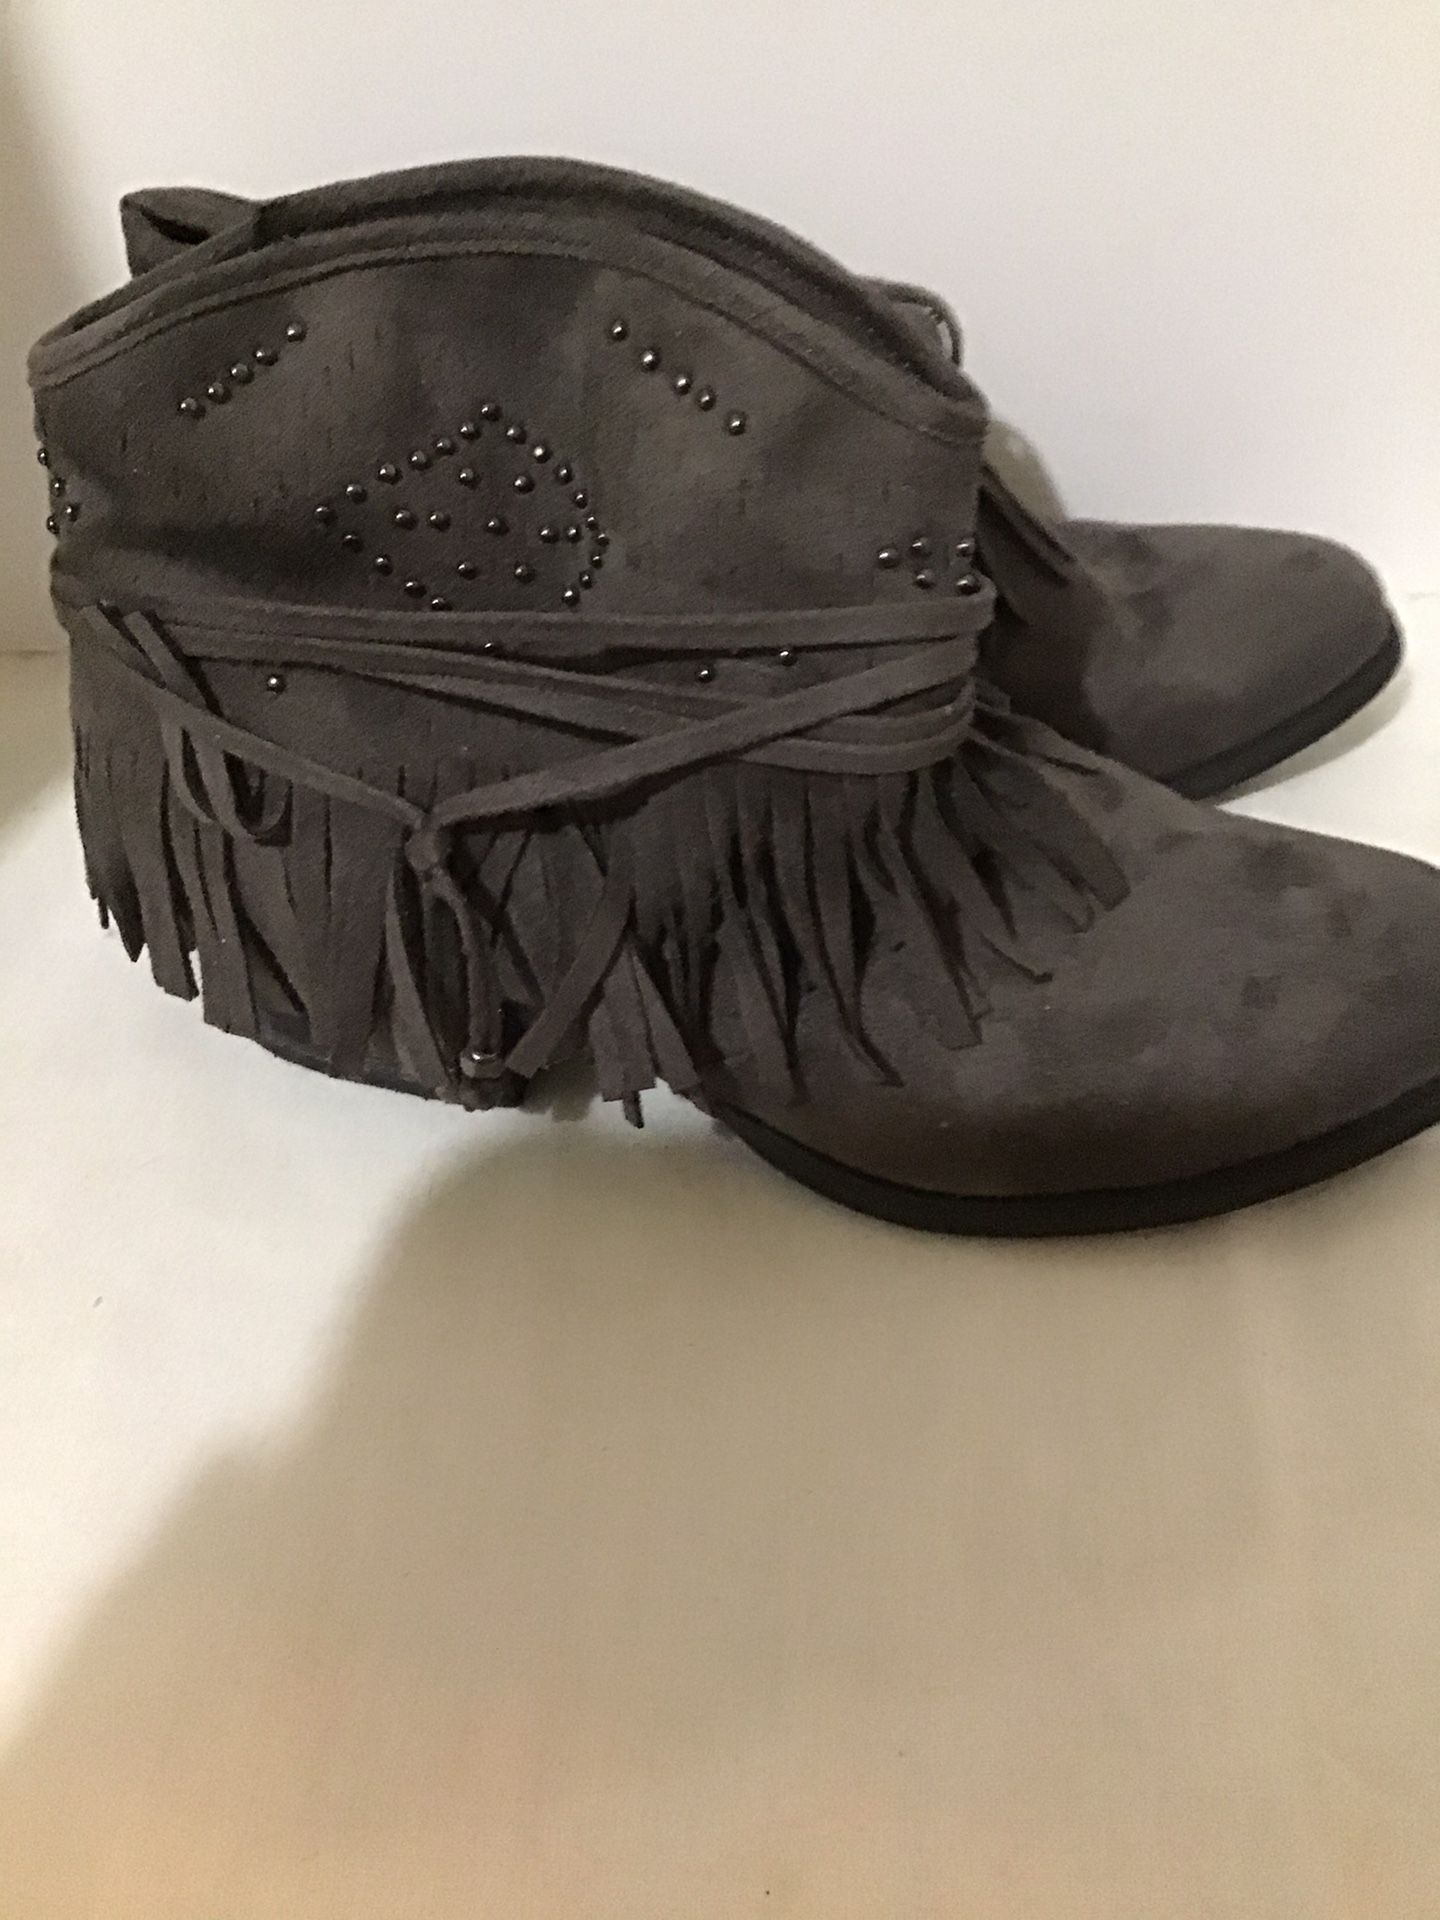 Ladies size 7 1/2 Grey Fringe Ankle High Boots